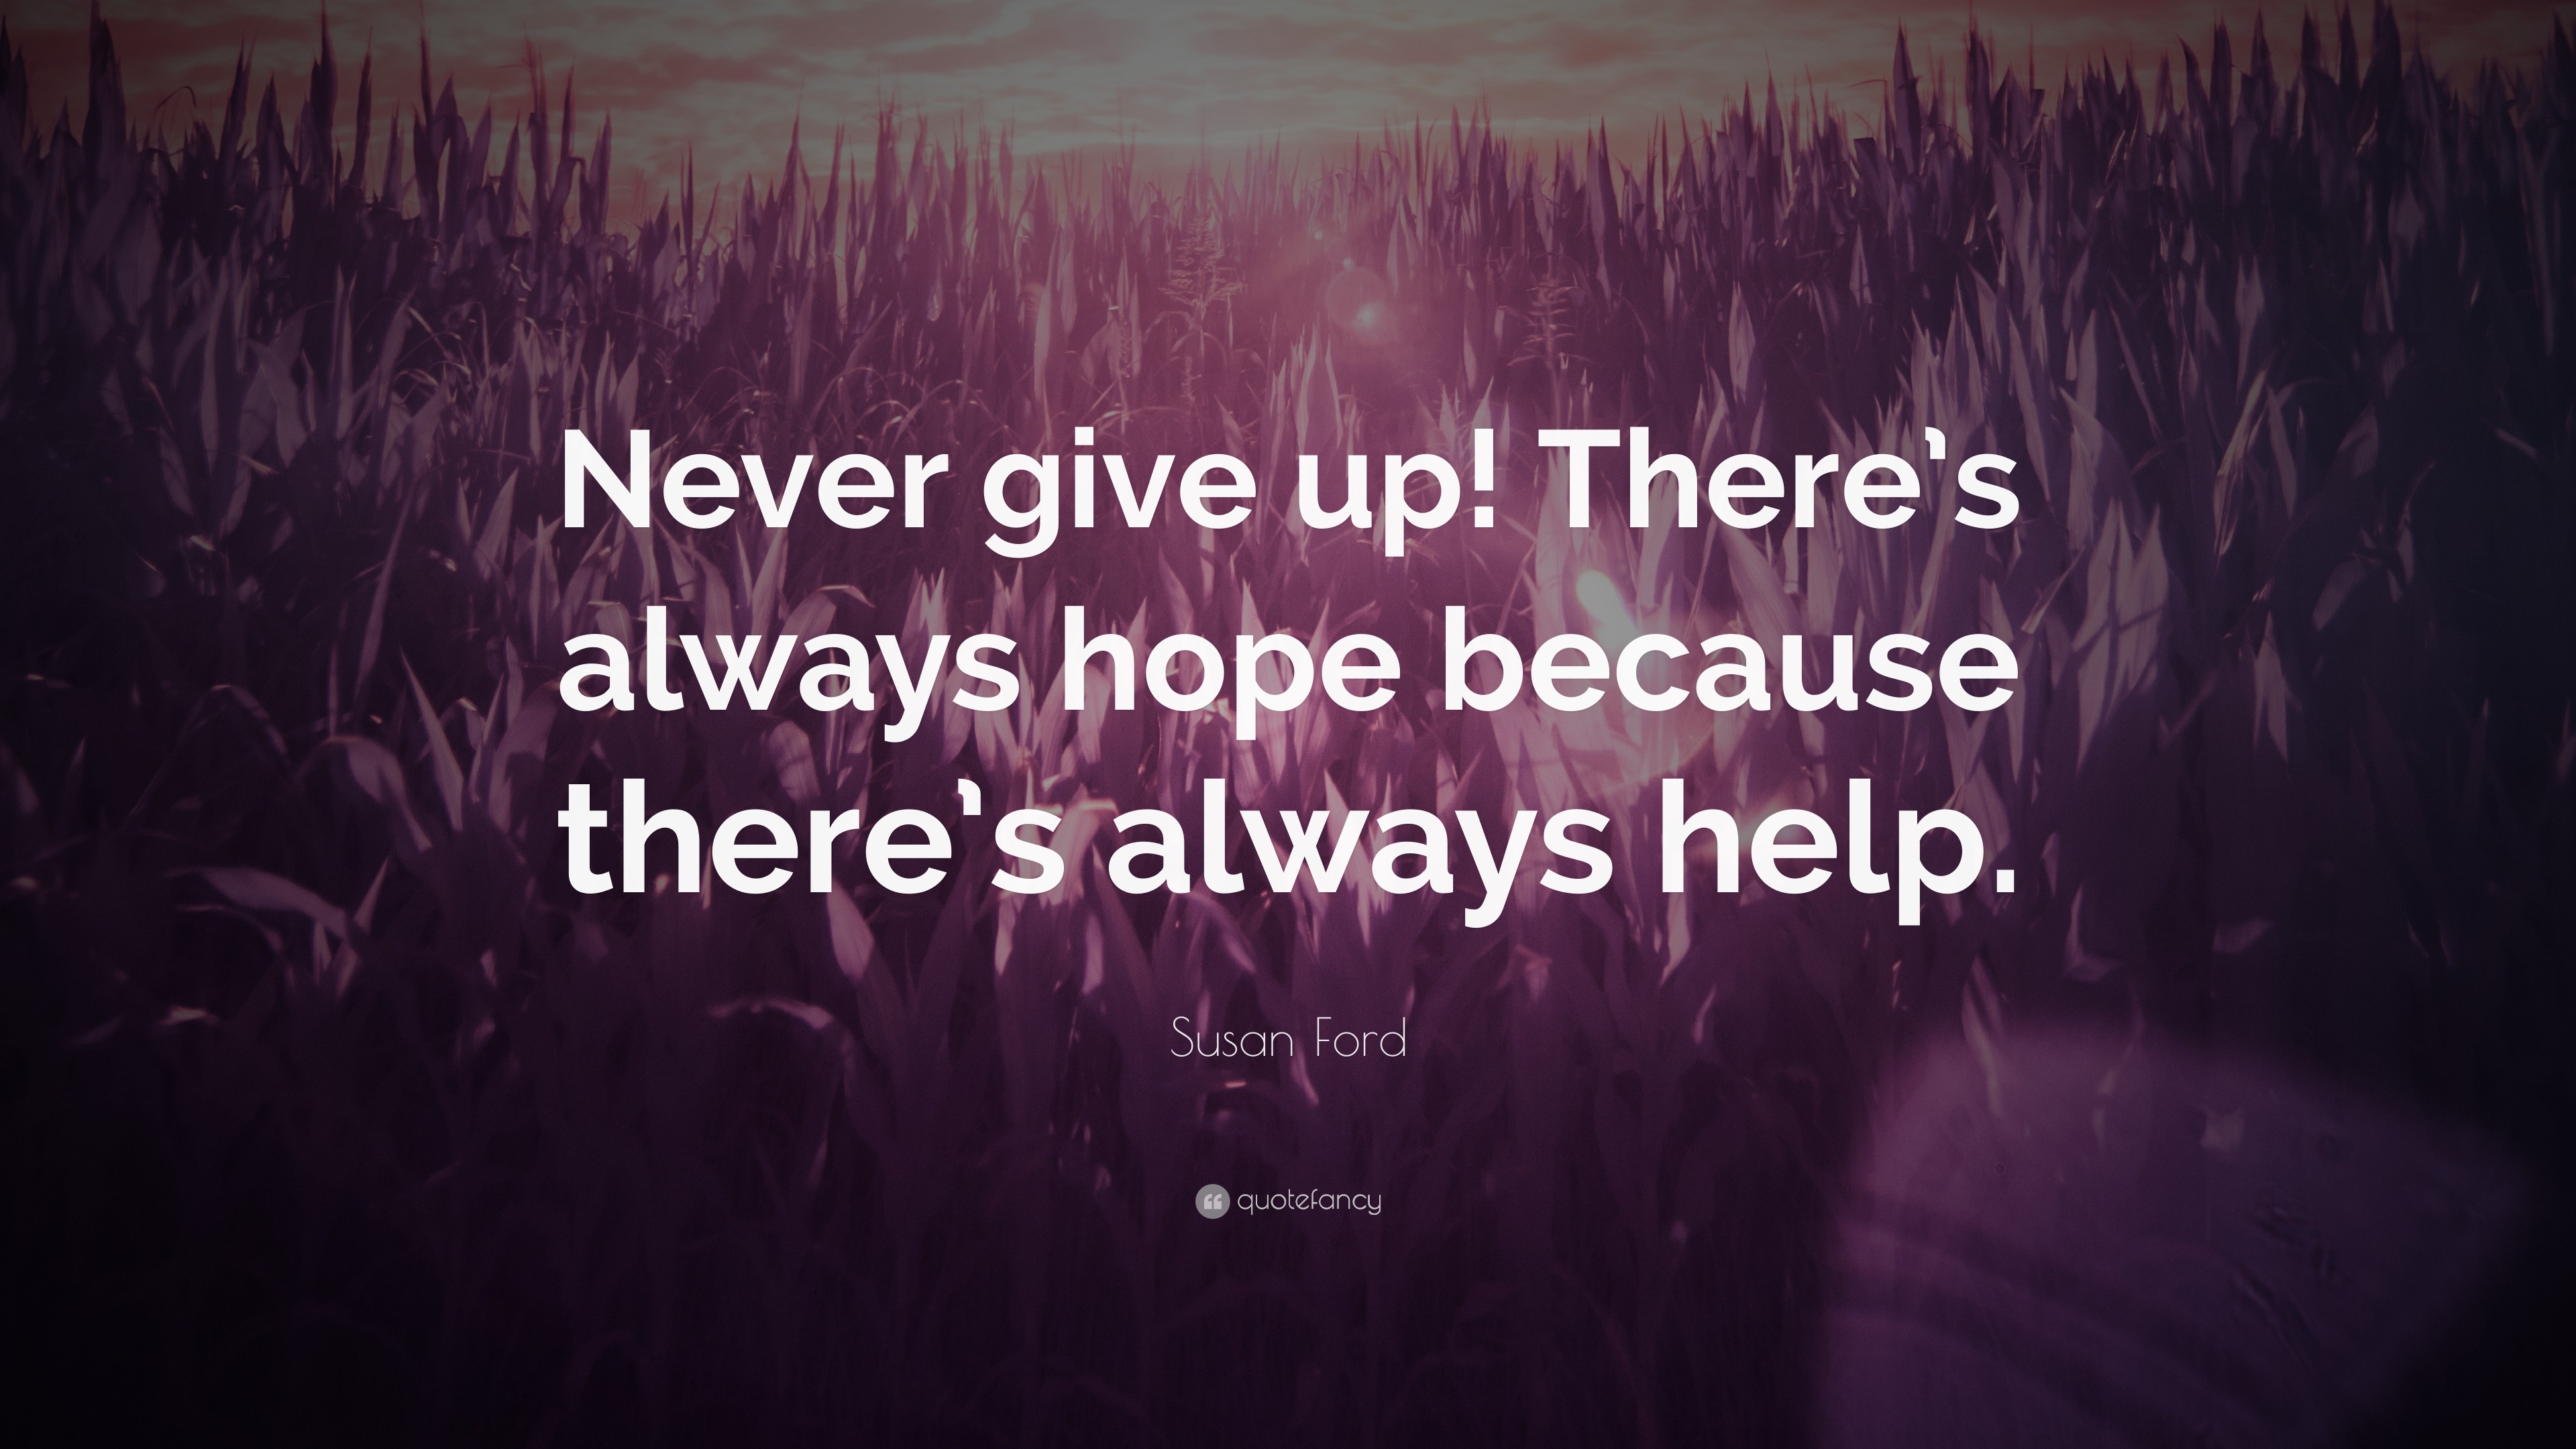 Susan Ford Quote “Never give up There s always hope because there s always help